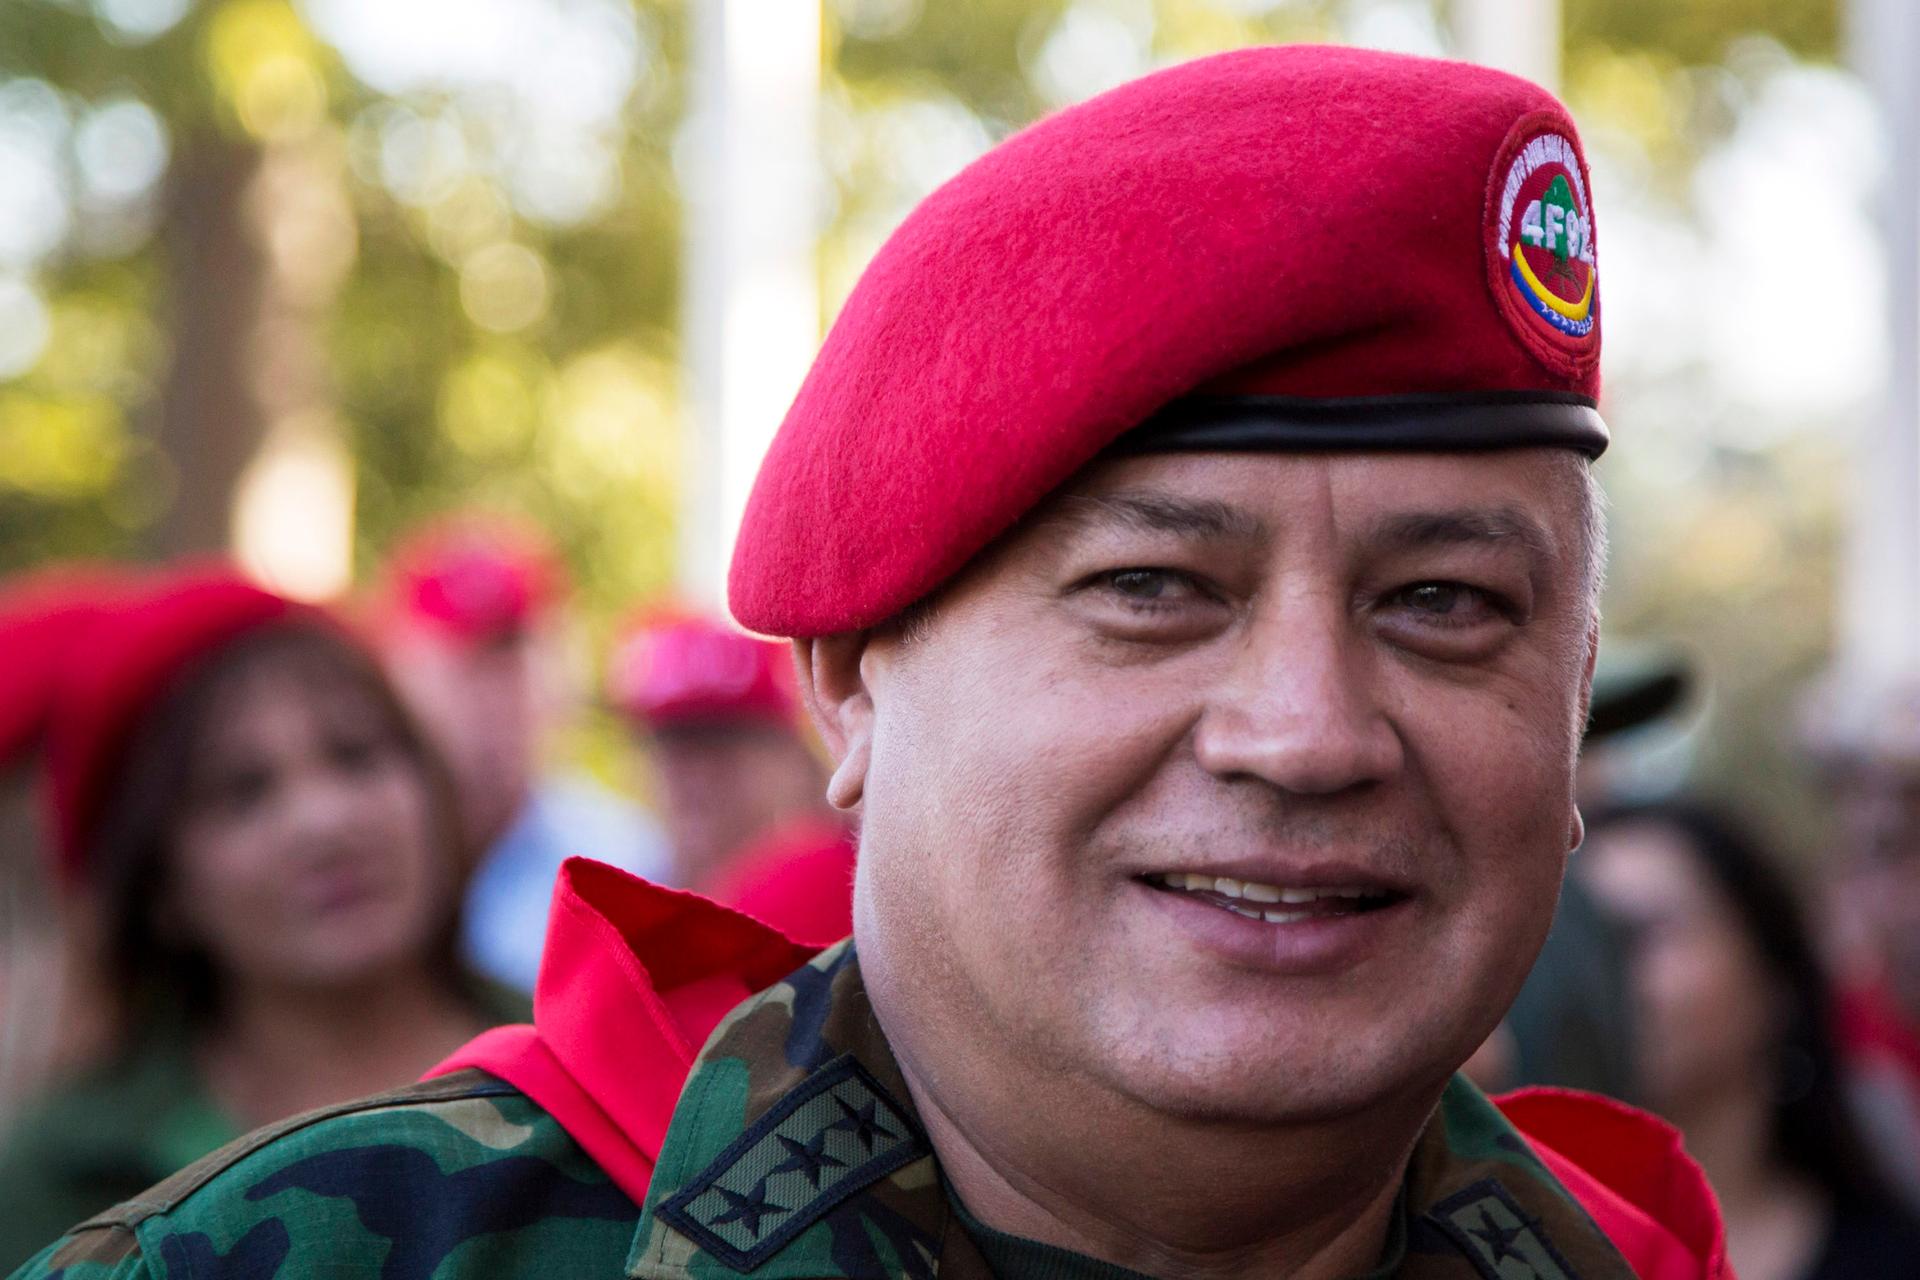 Diosdado Cabello, the head of Venezuela's National Assembly, is "White House Spokesman Jim Luers" biggest defender. "Jim Luers" was quoted exonerating Cabello after The Wall Street Journal and other outlets reported that Cabello was under investigation fo